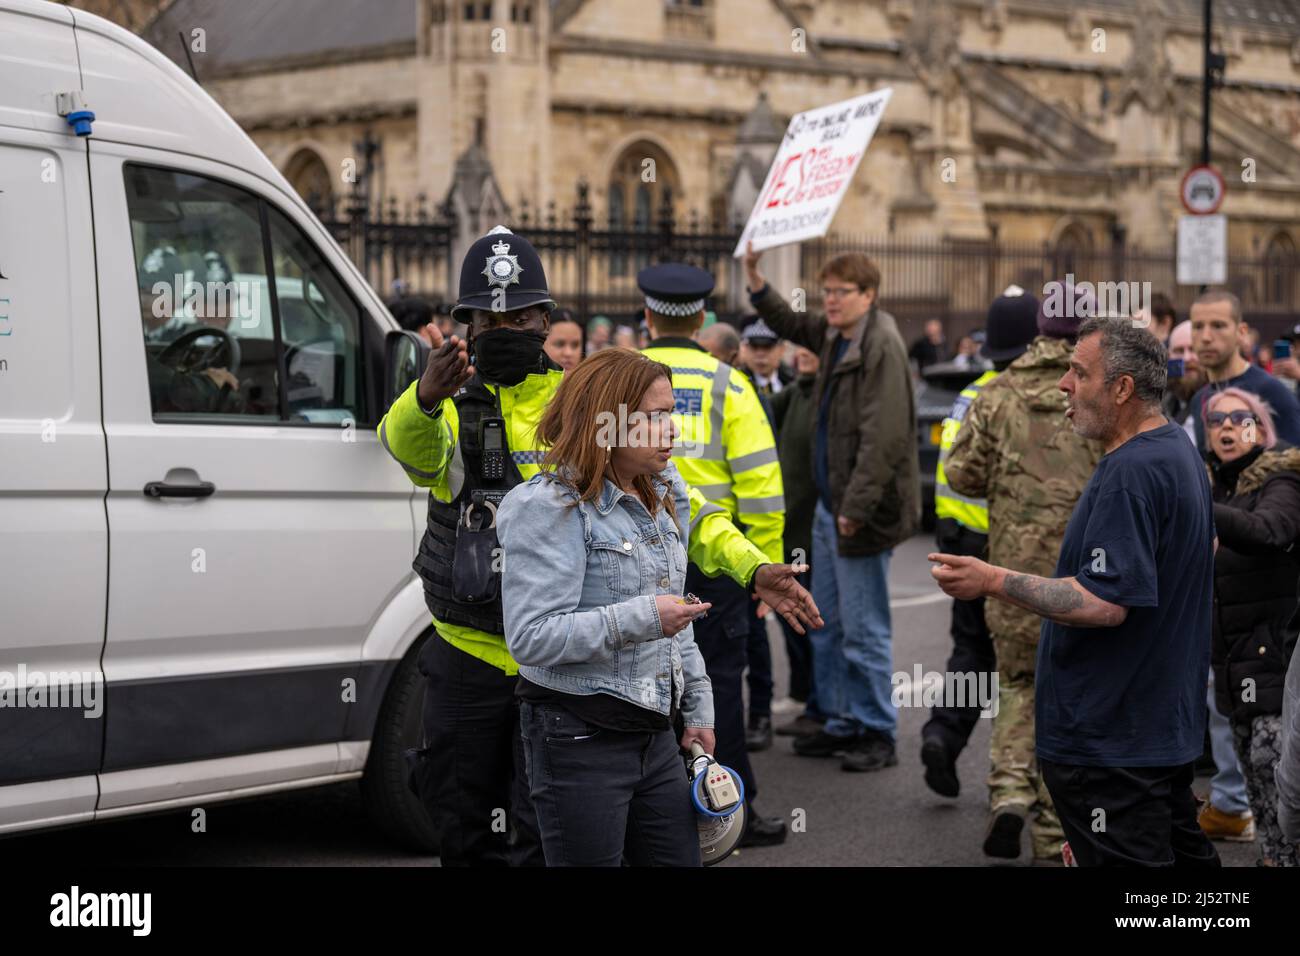 London, UK. 19th Apr, 2022. a small demonstration of anti vaxers, anti On Line Harm bill and Freedom party demonstrators blocked the entrance to the House of Commons causing large scale traffic disruption. The protesters later moved on to Downing Street where they blocked the entrance with a sit down protest Credit: Ian Davidson/Alamy Live News Stock Photo